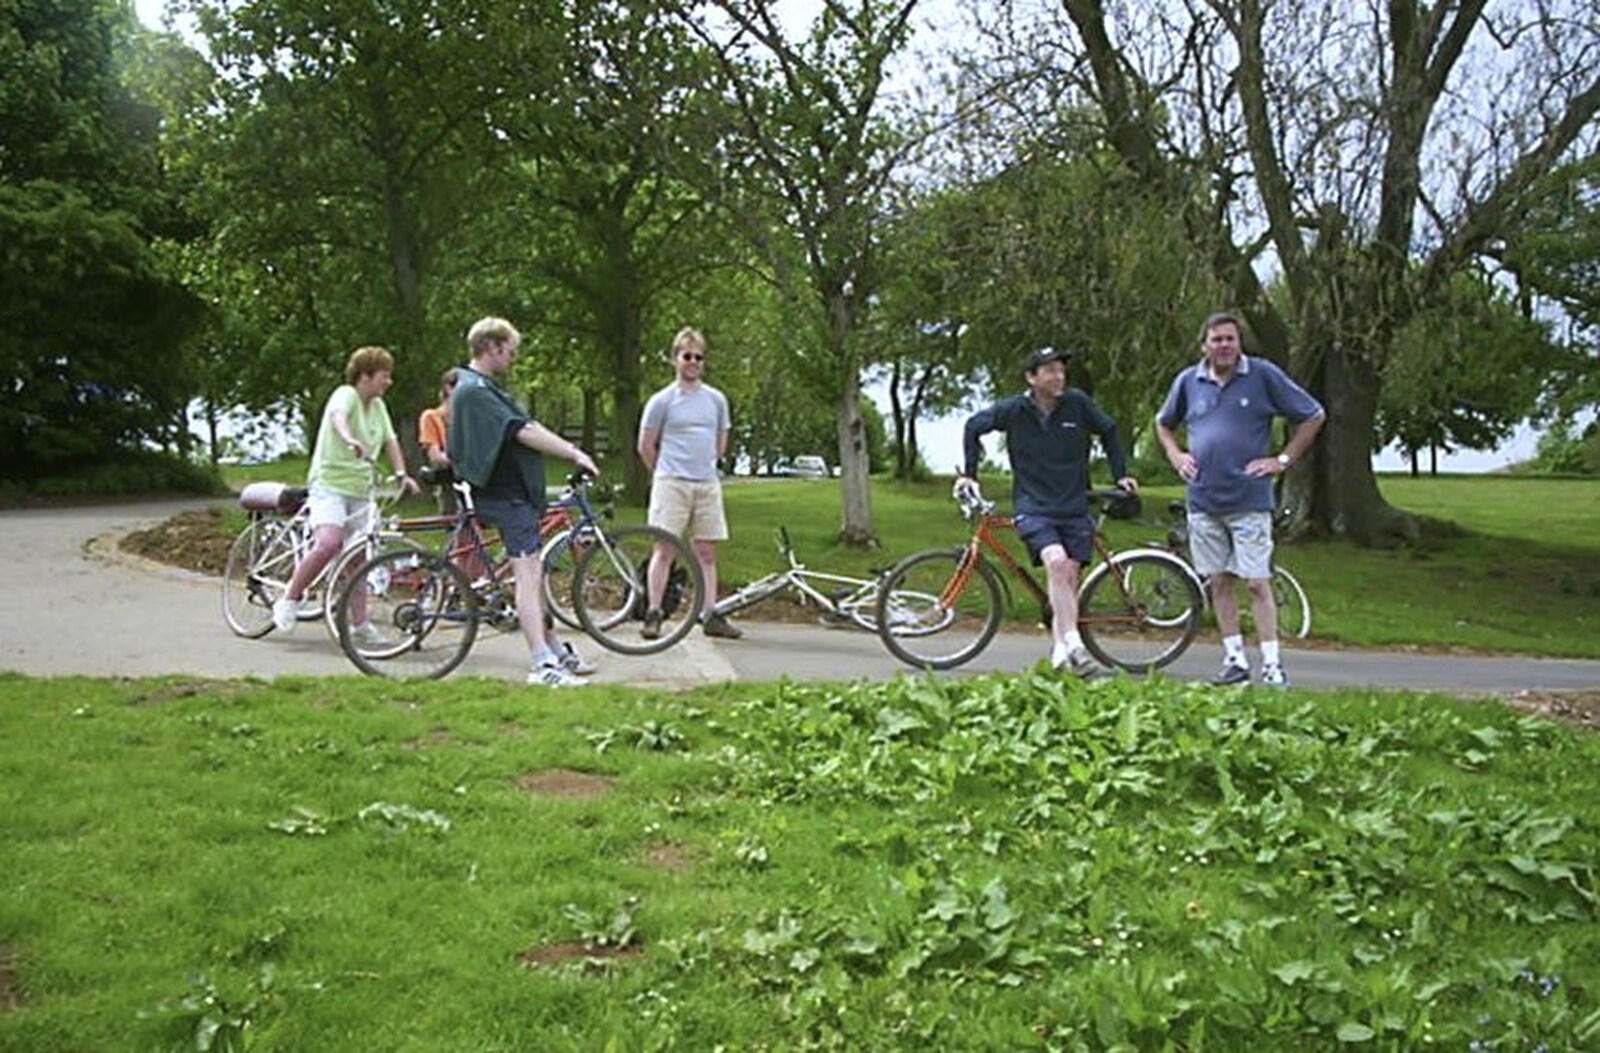 Group photo near the marina from The BSCC Annual Bike Ride, Marquess of Exeter, Oakham, Rutland - 12th May 2001